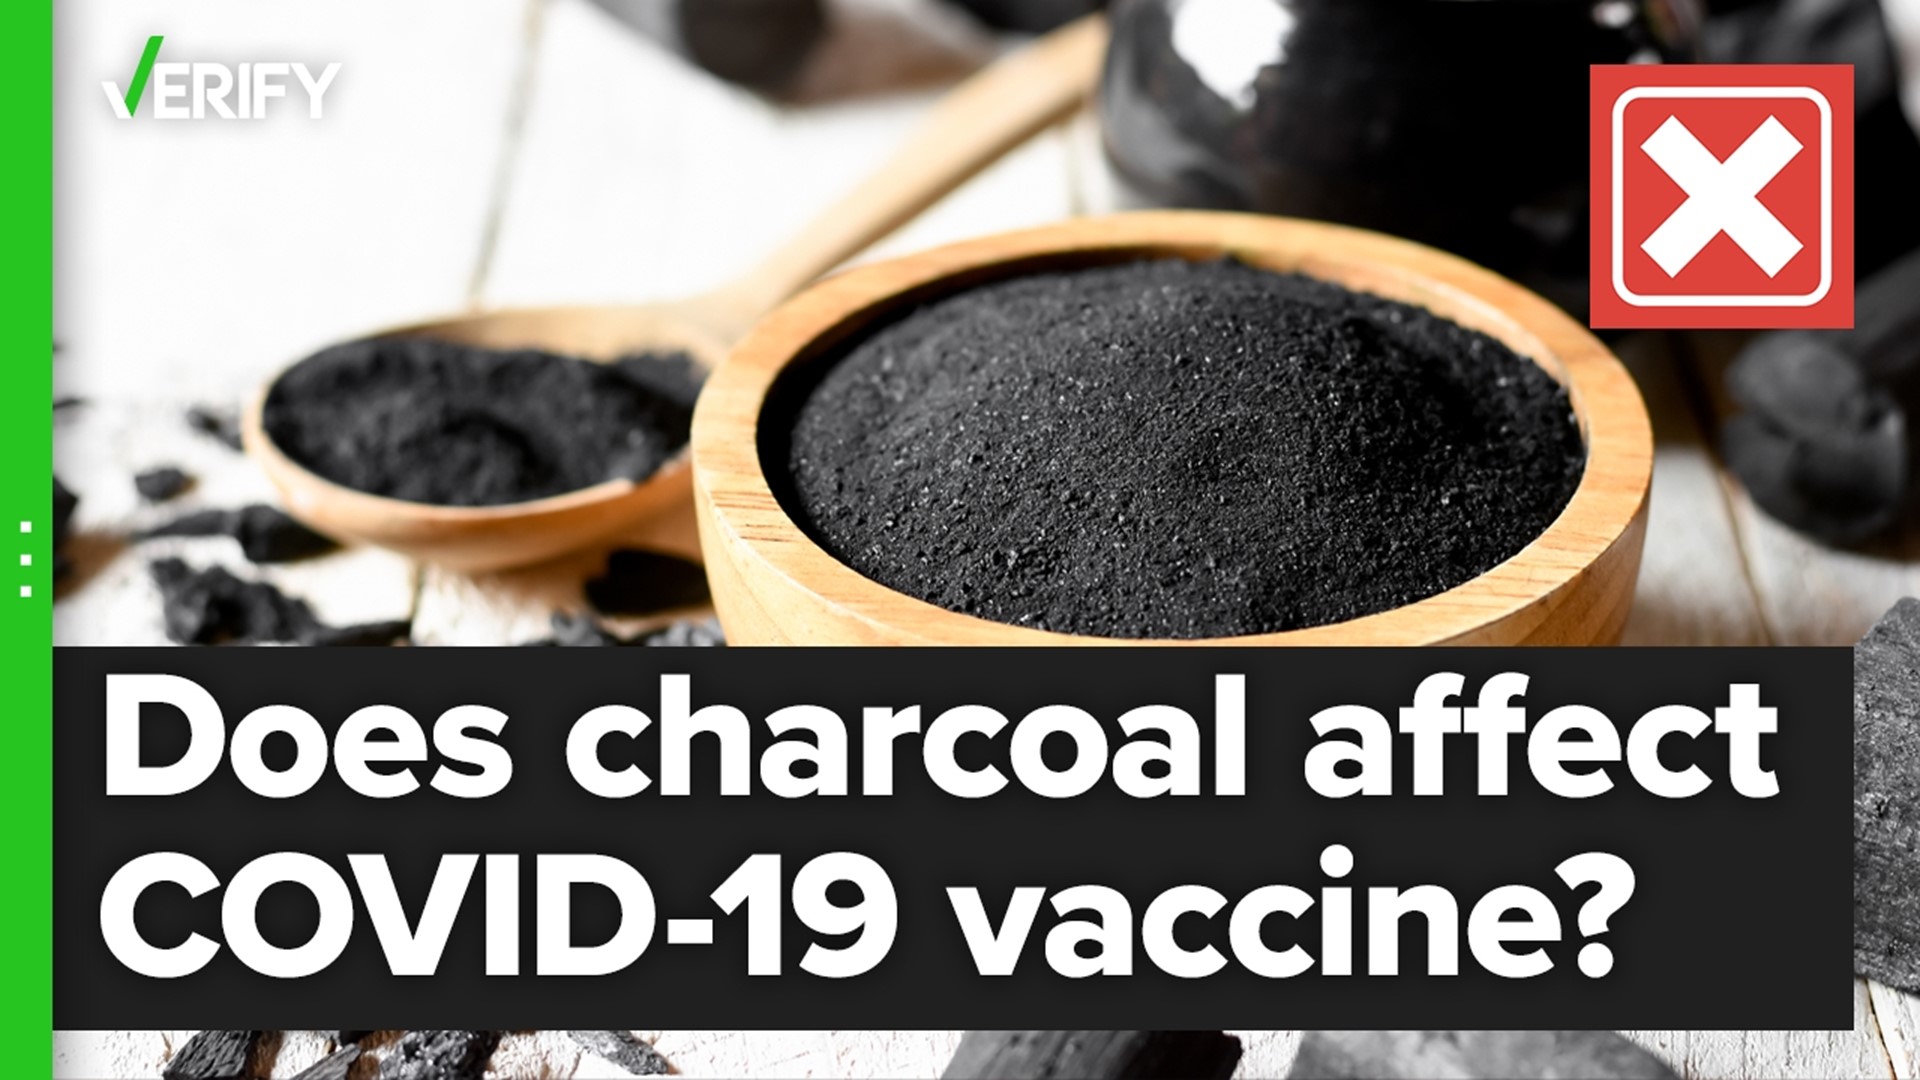 Doctors say since activated charcoal is ingested orally and does not enter a person’s bloodstream, it won’t affect the COVID-19 vaccines.